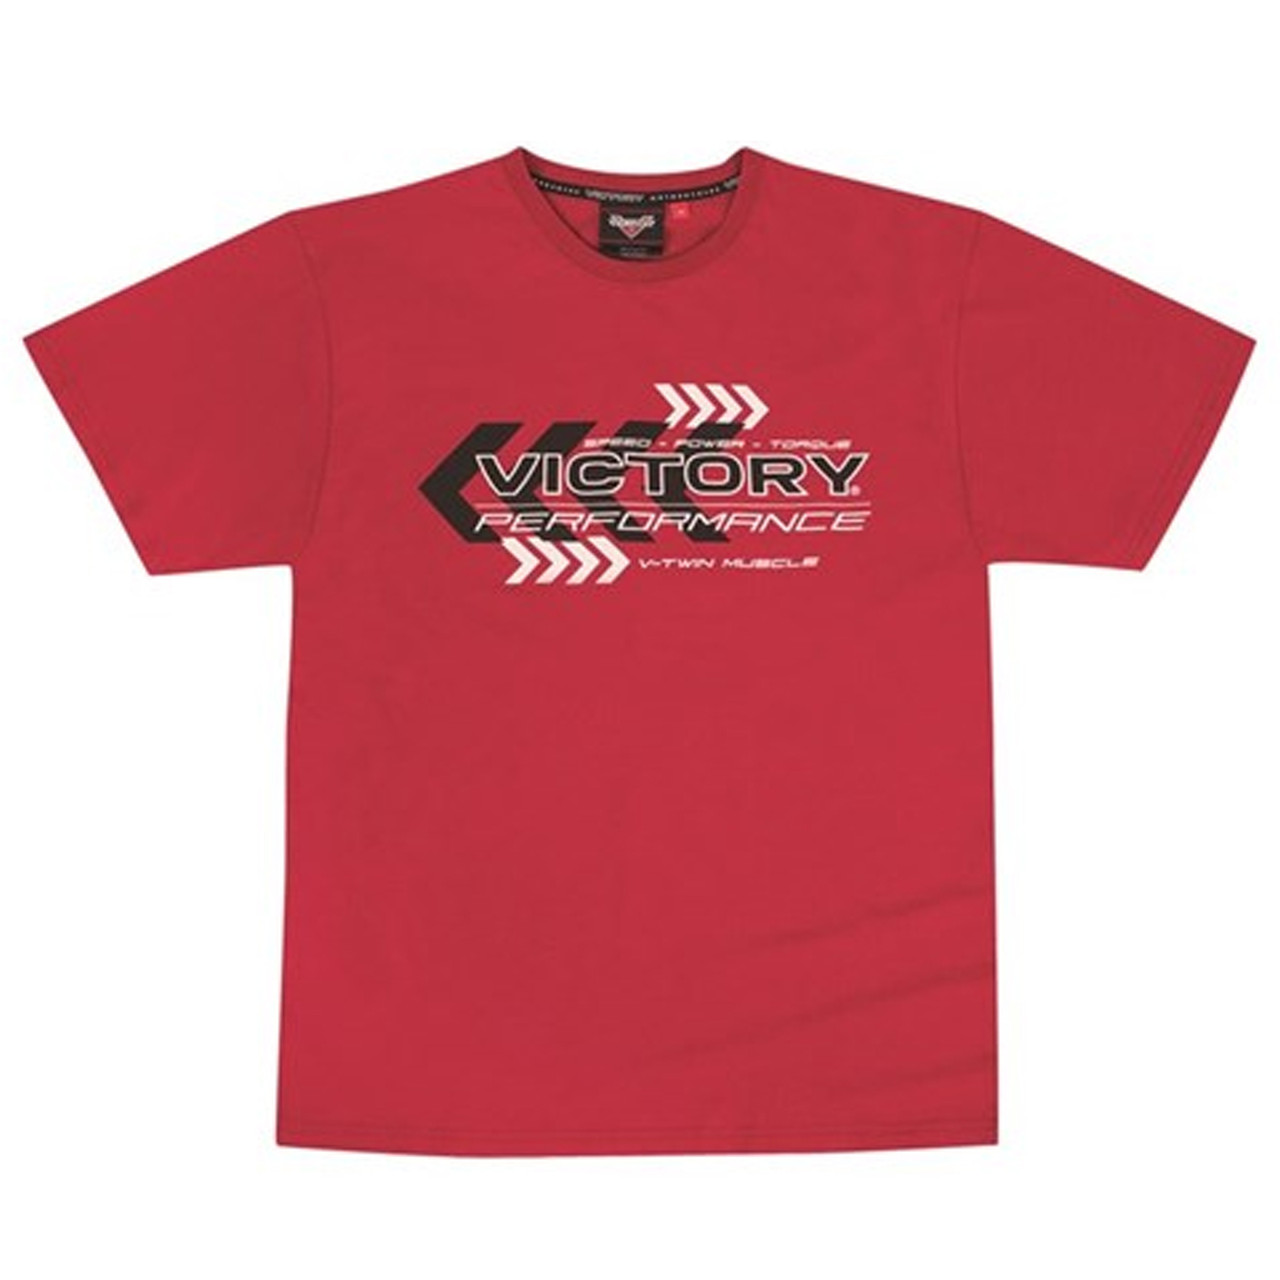 Victory Motorcycle New OEM Men's Red Chevron Short Sleeve Shirt, Small, 28663040